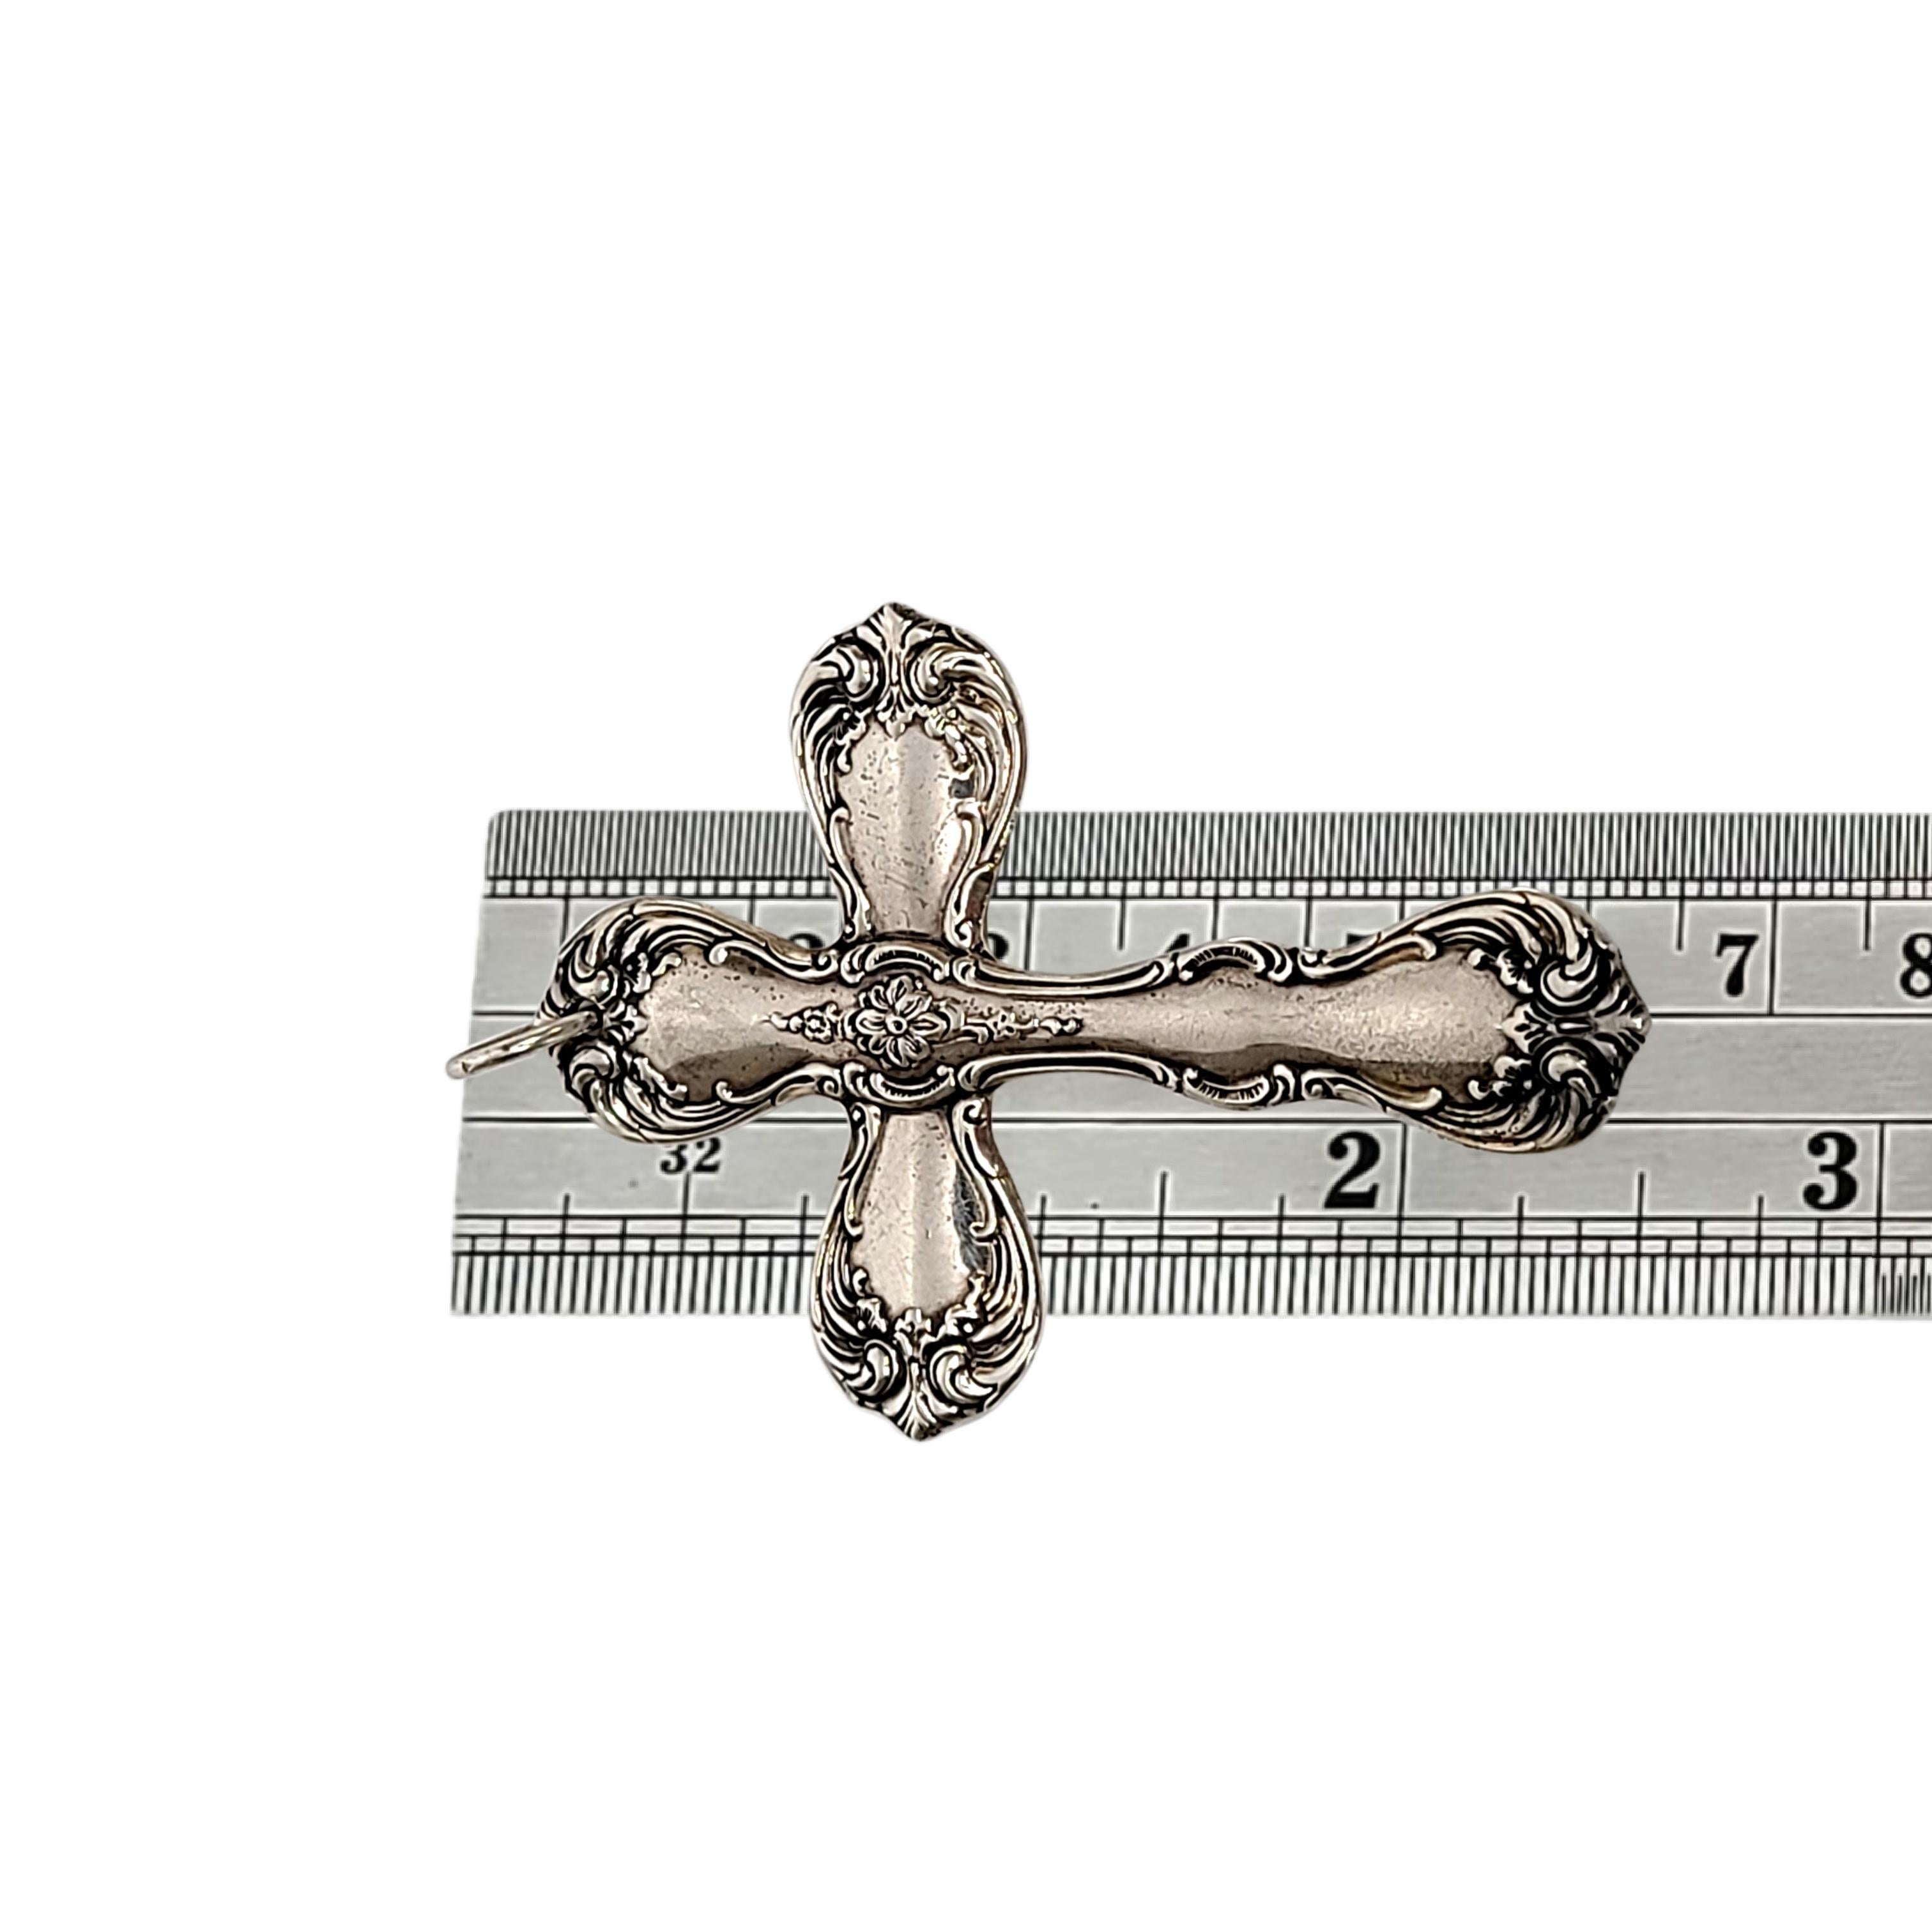 Towle Old Master Sterling Silver Cross Pendant/Ornament 1